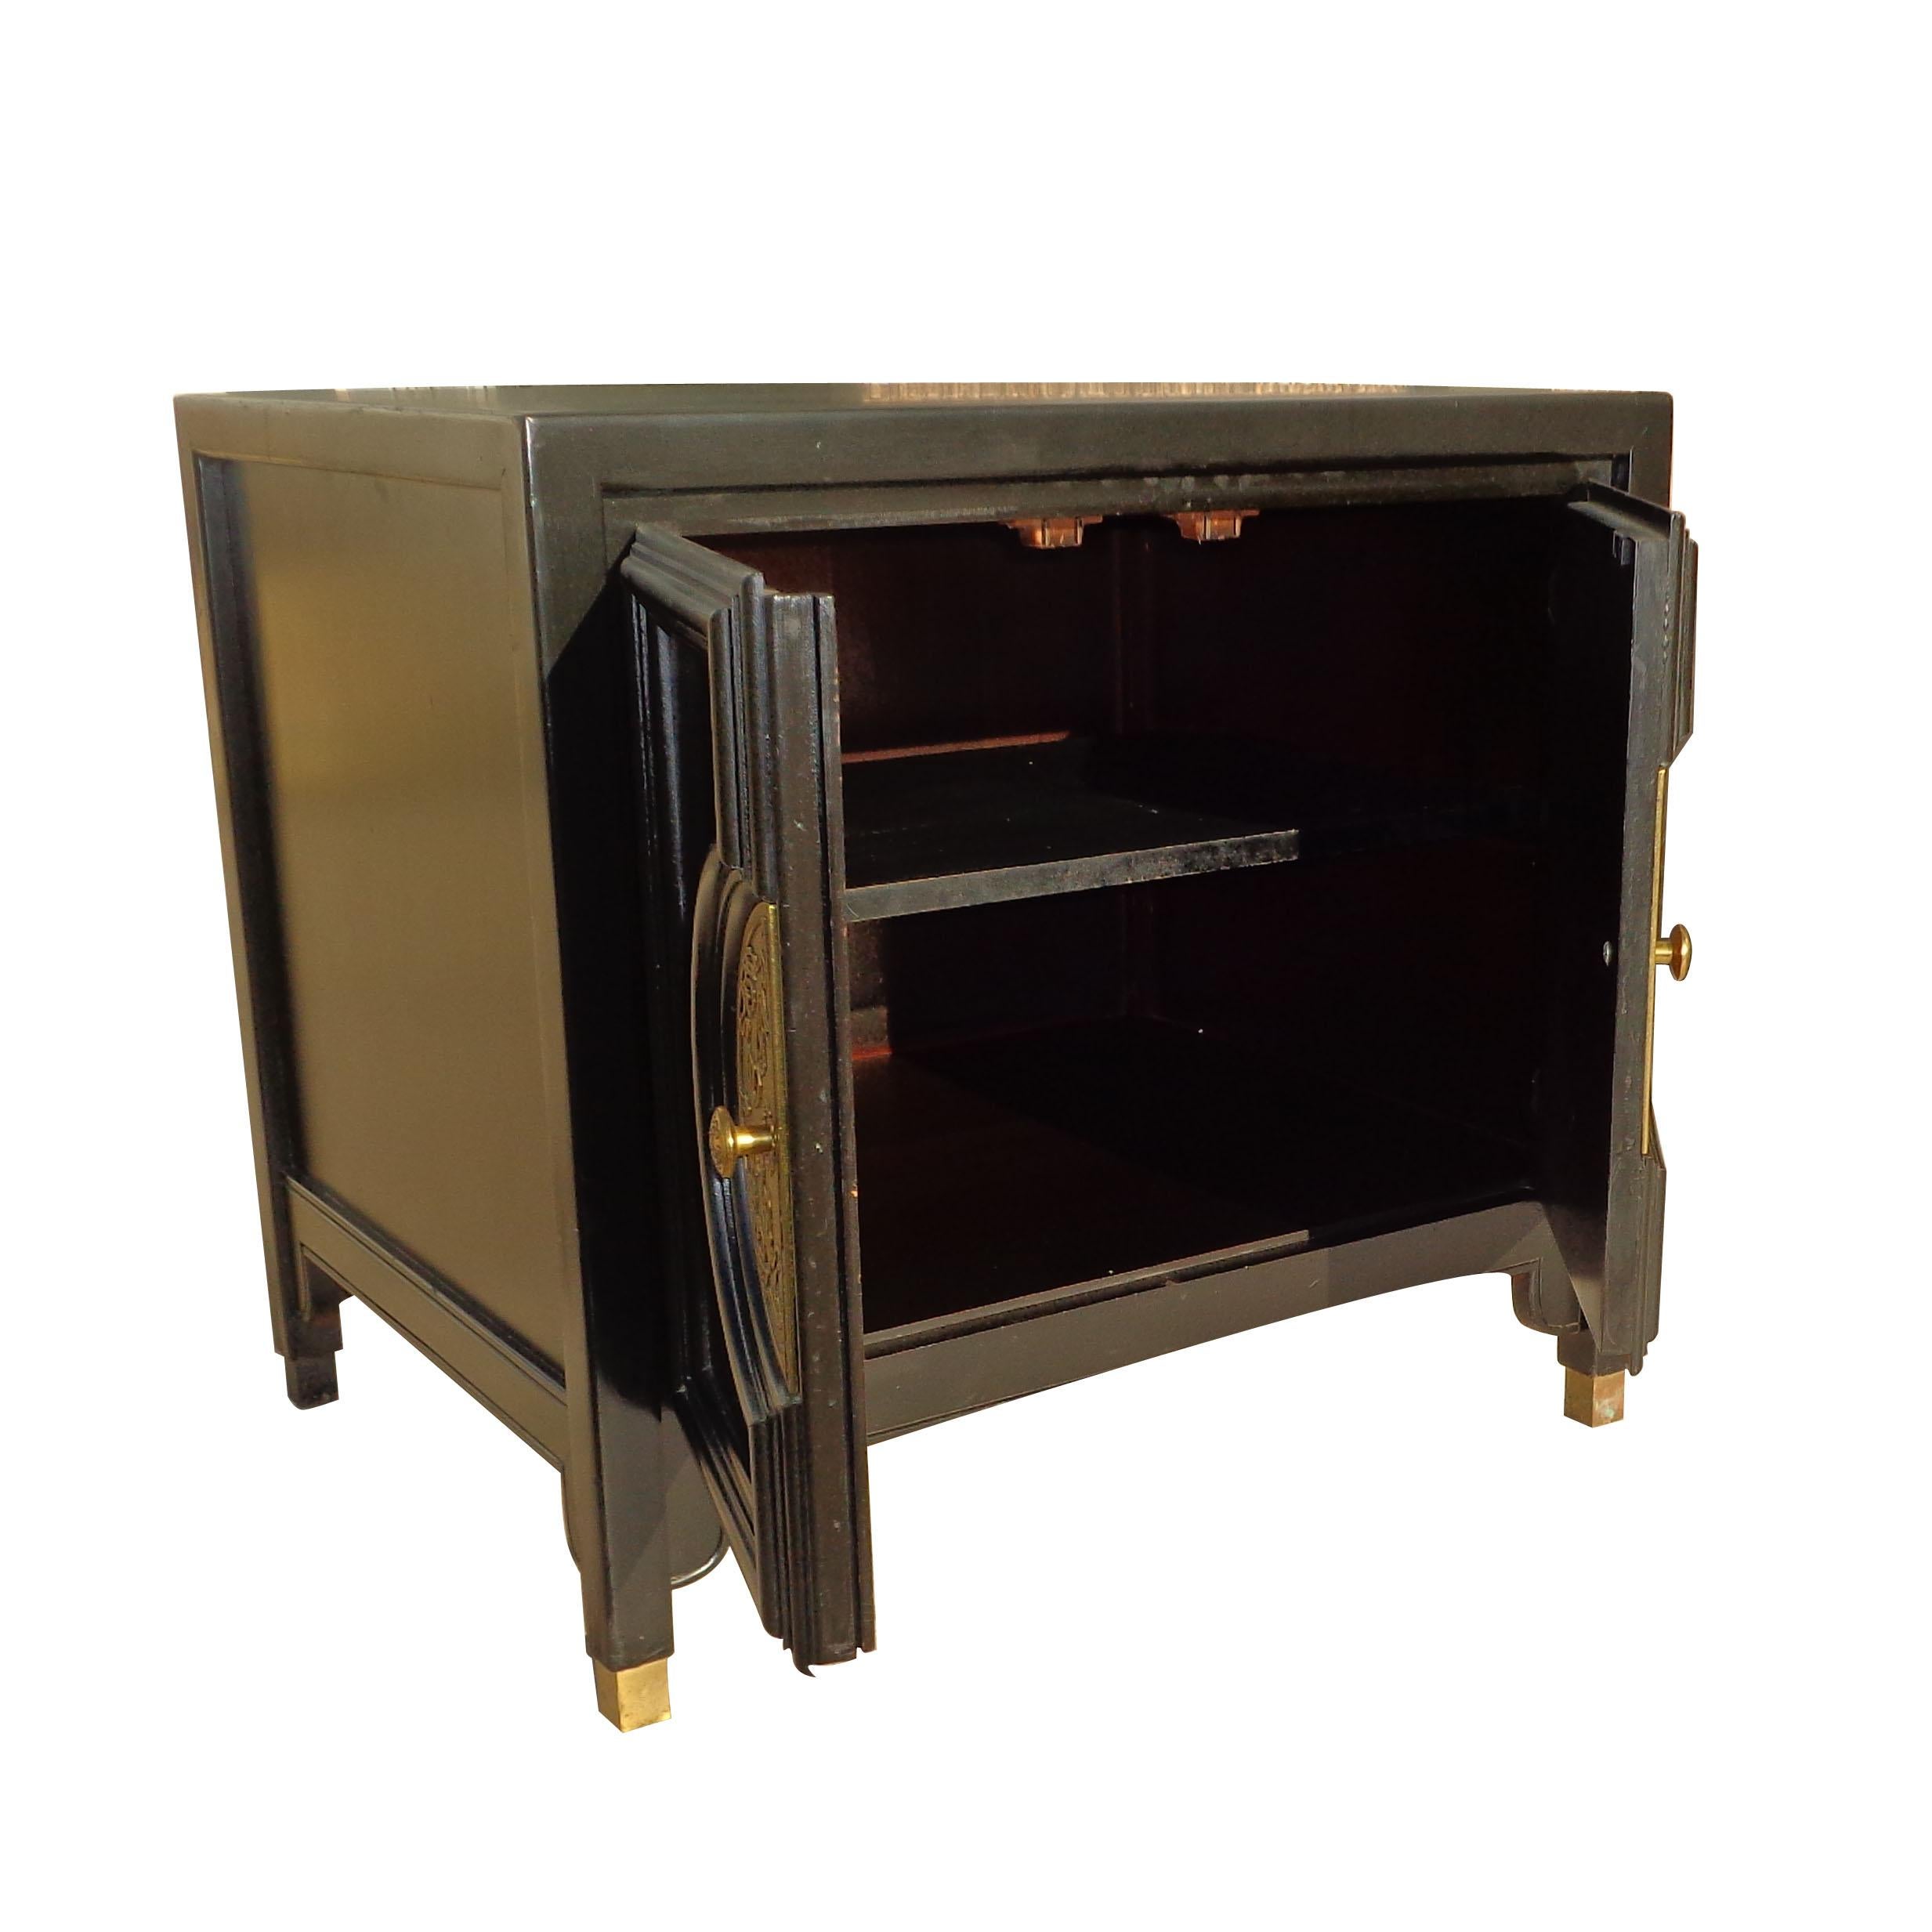 Pair of Century Furniture Chin Hua nightstands

Pair of Century Furniture Chin Hua nightstands

Pair of Chin Hua nightstands by Century Furniture. Ebonized cases with brass hardware and brass-tipped feet. 
Open cabinet space with shelf. Stamped with